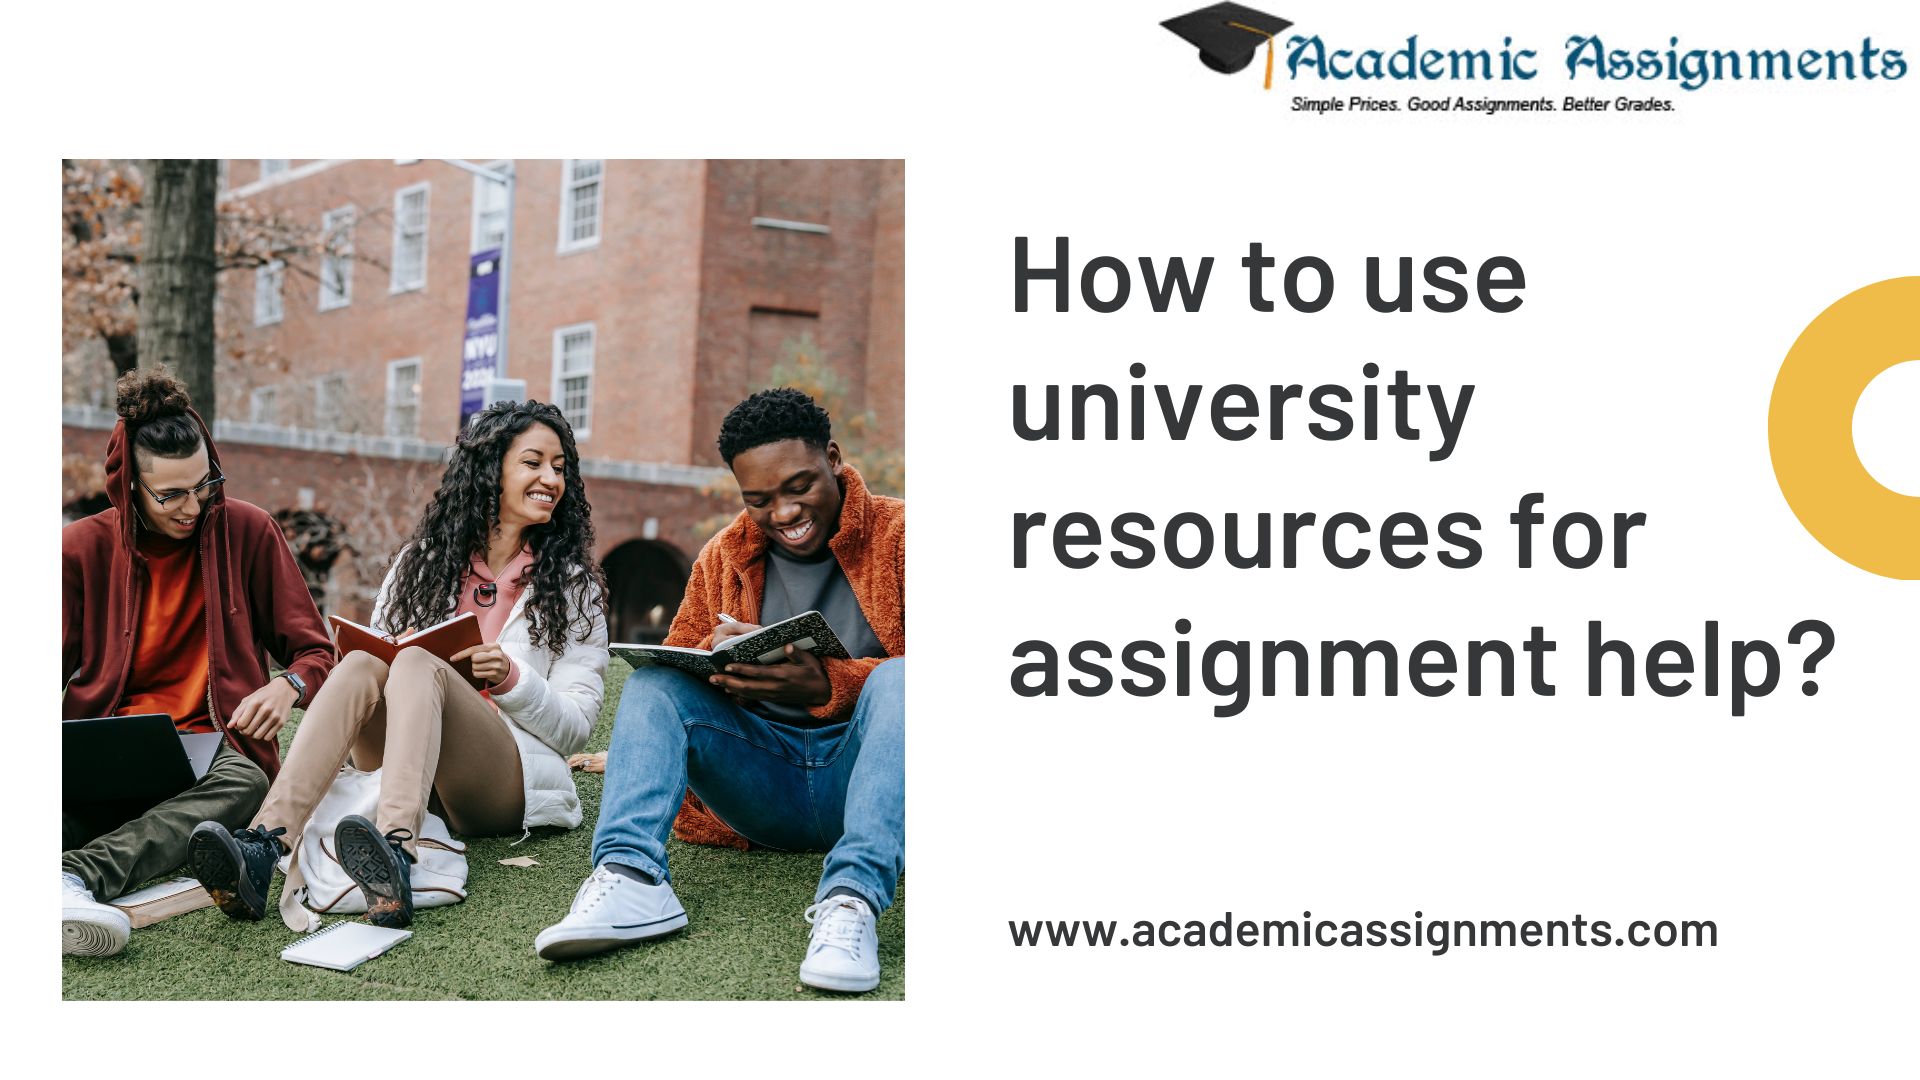 How to use university resources for assignment help